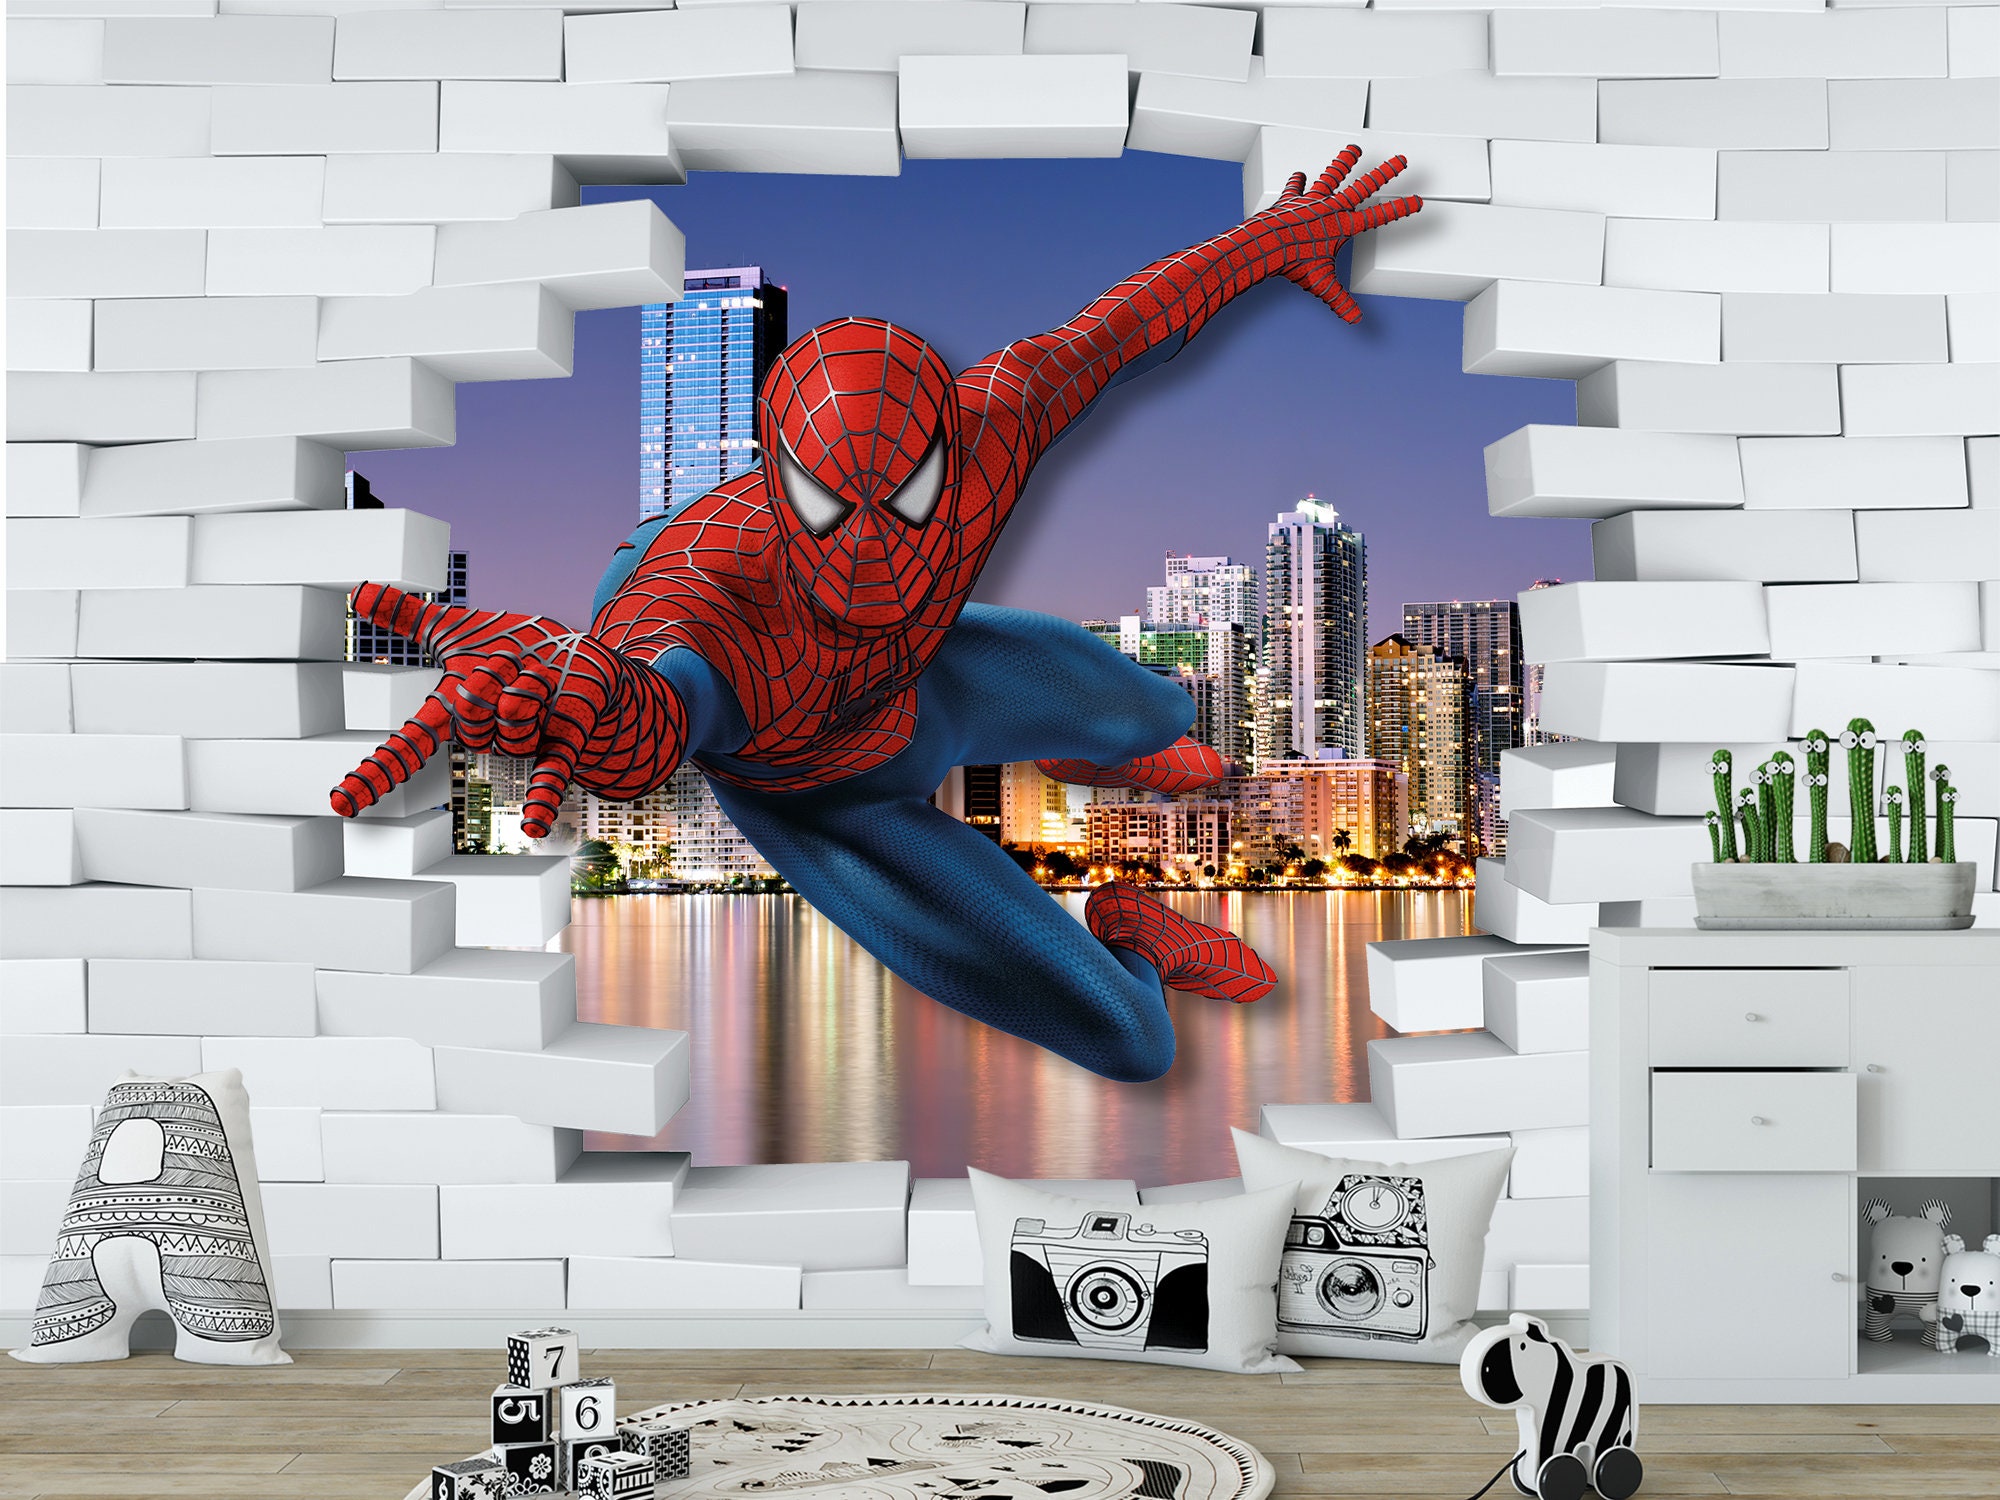 Never announce your next move - 3D Wall Art